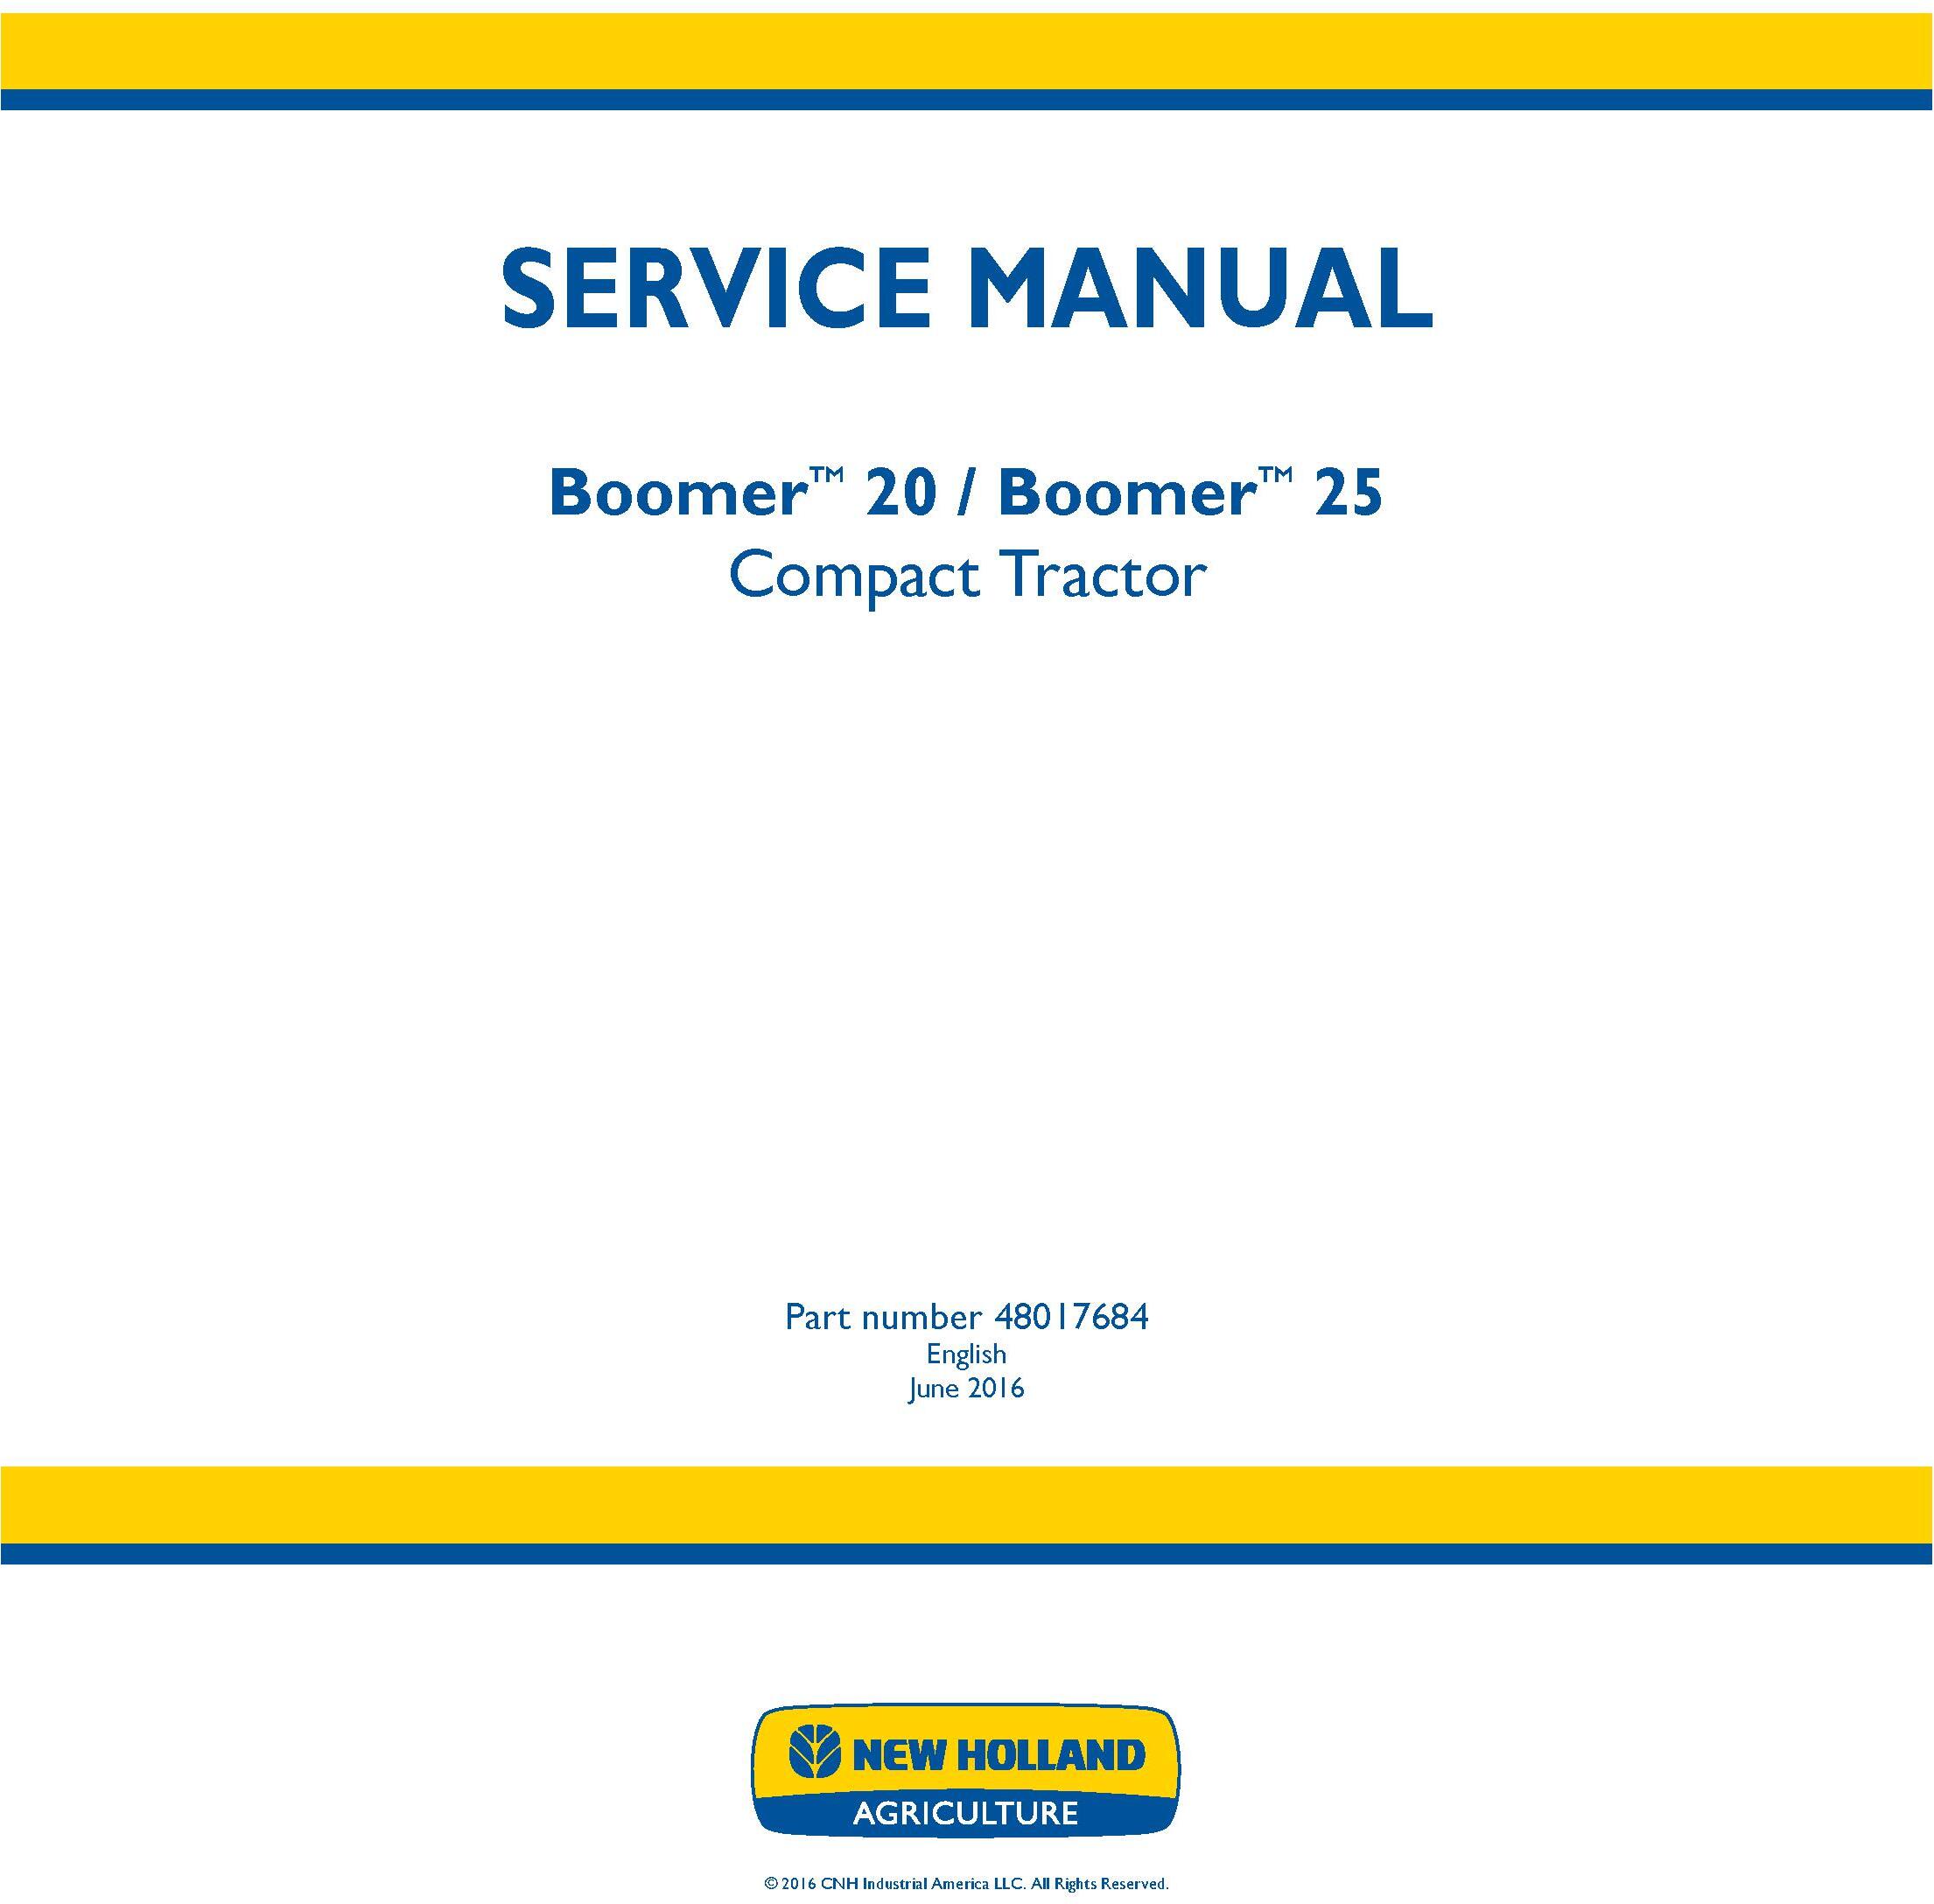 New Holland Boomer 20, Boomer 25 Compact Tractor Service Manual (Europe) - 19481